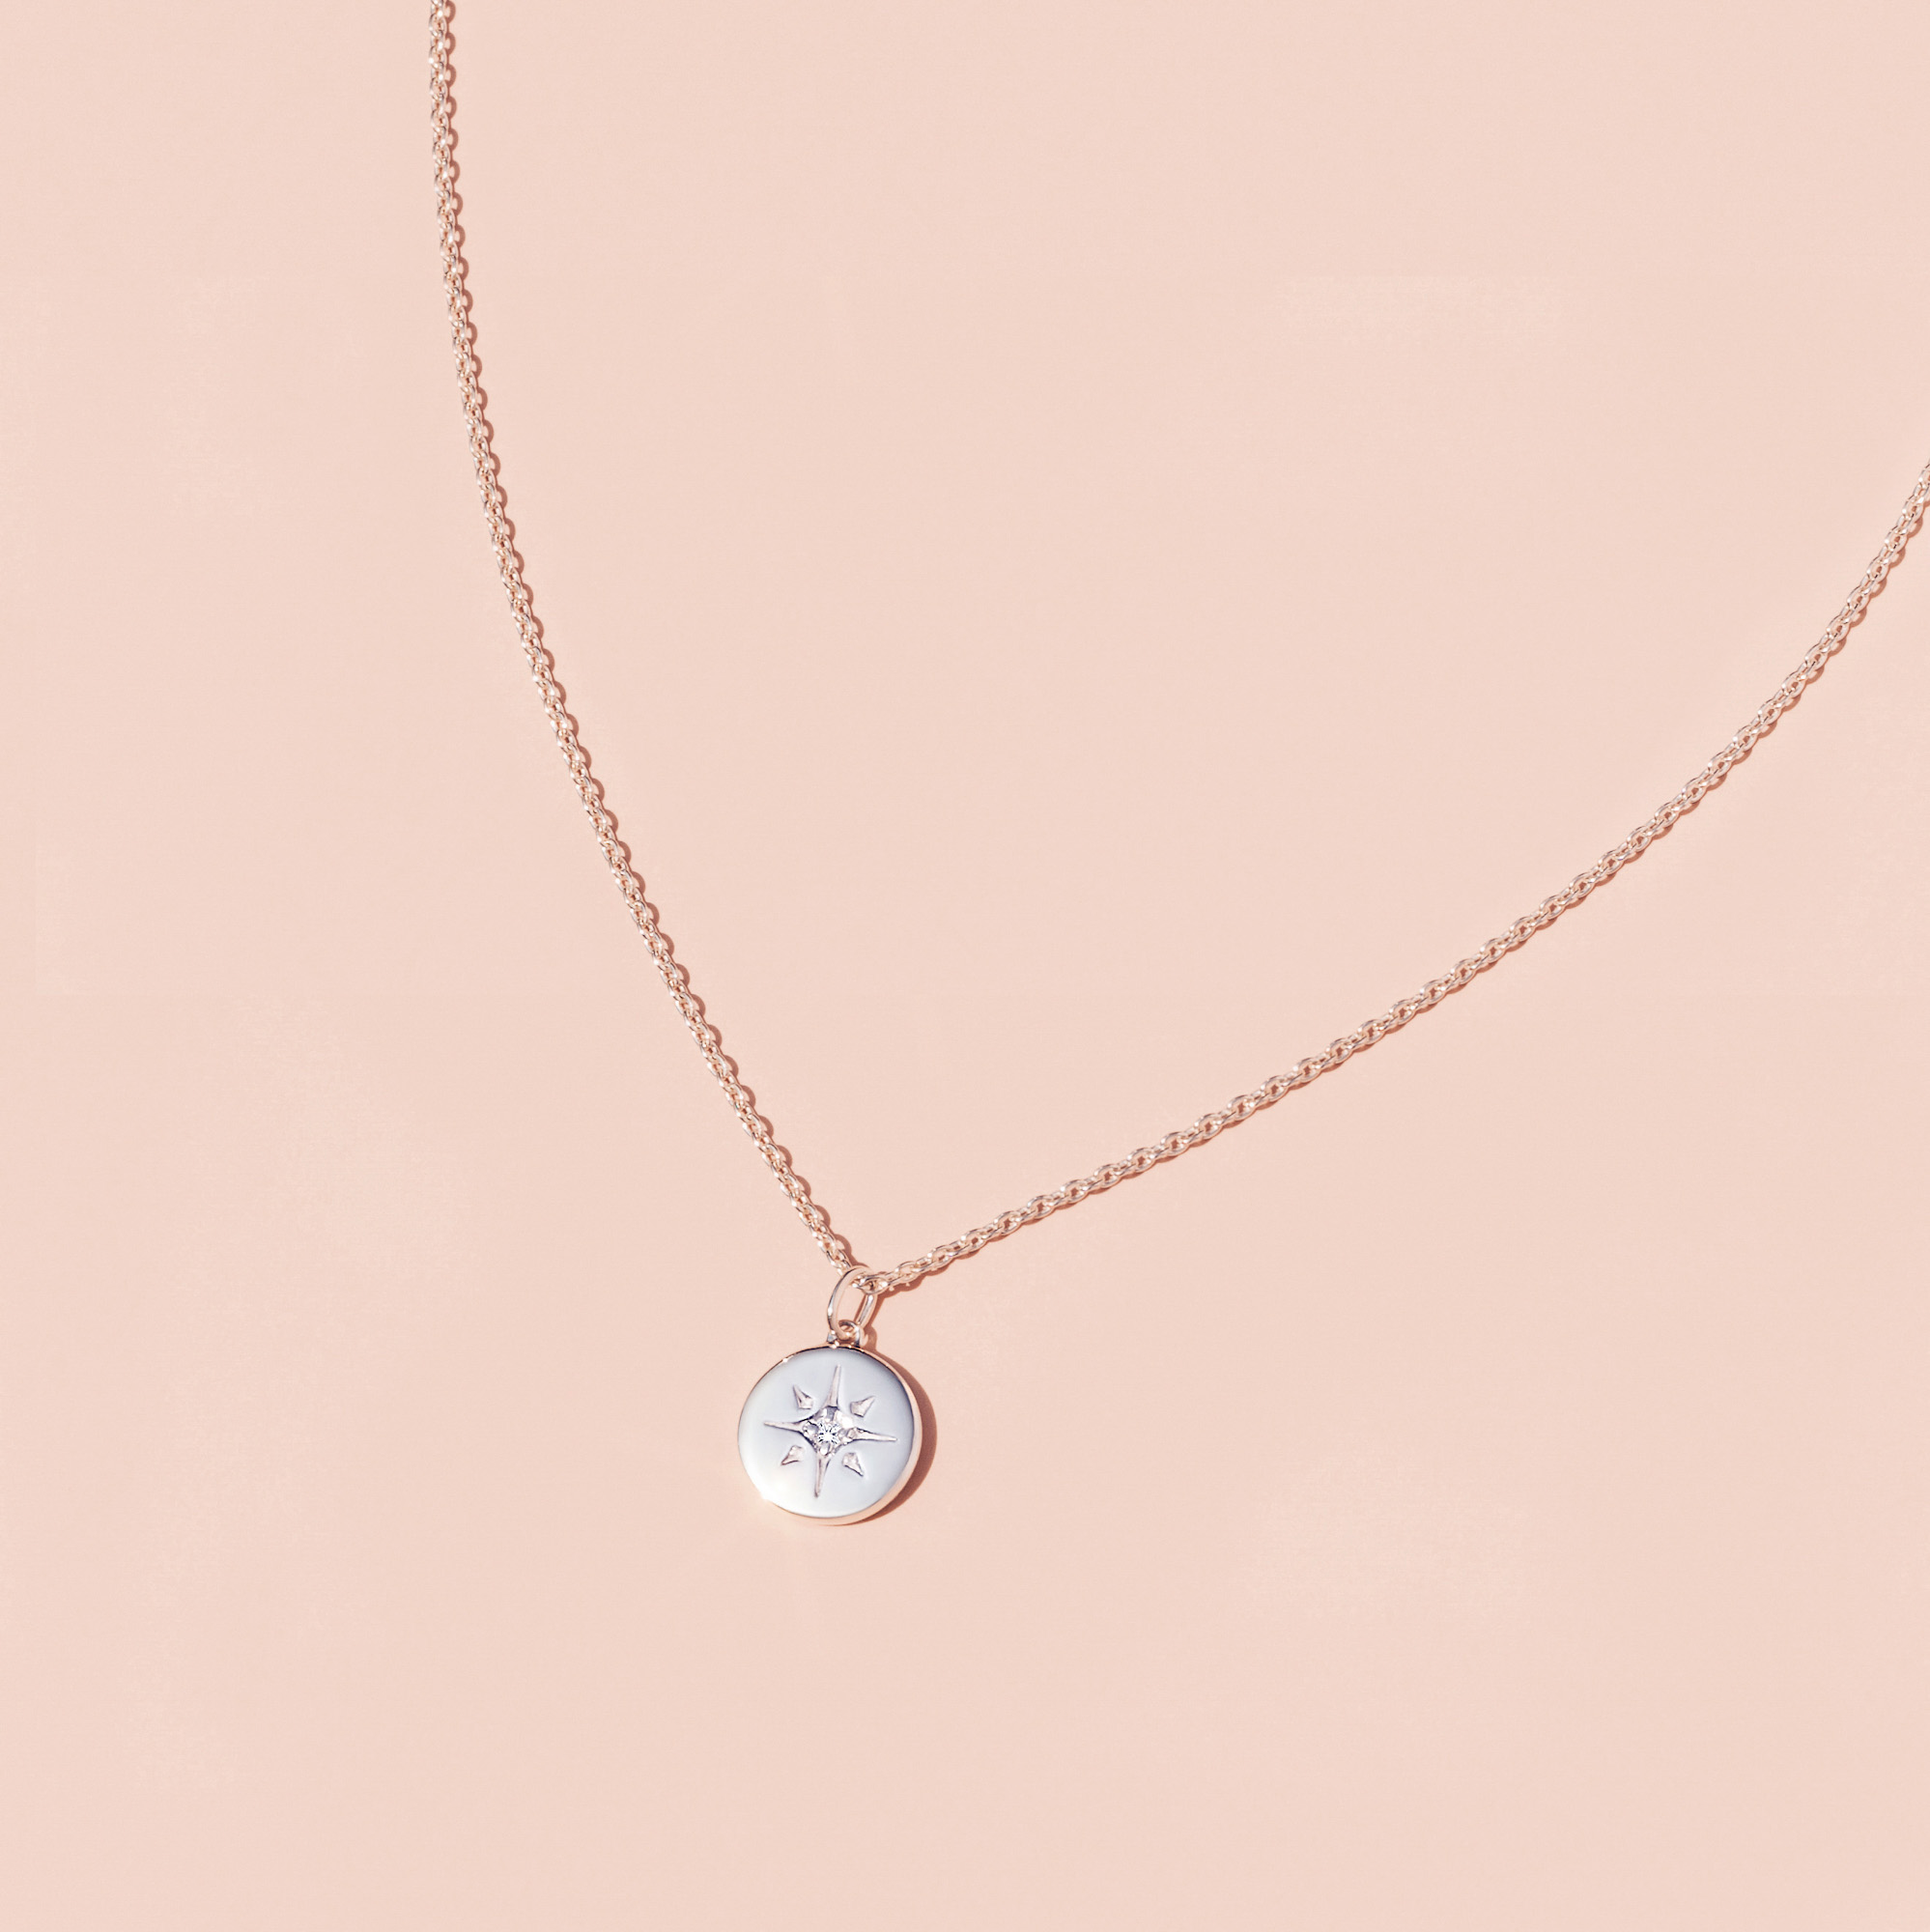 15 Quotes About Mom to Engrave on Memorial Jewelry  Keepsakes  LegacyTouch